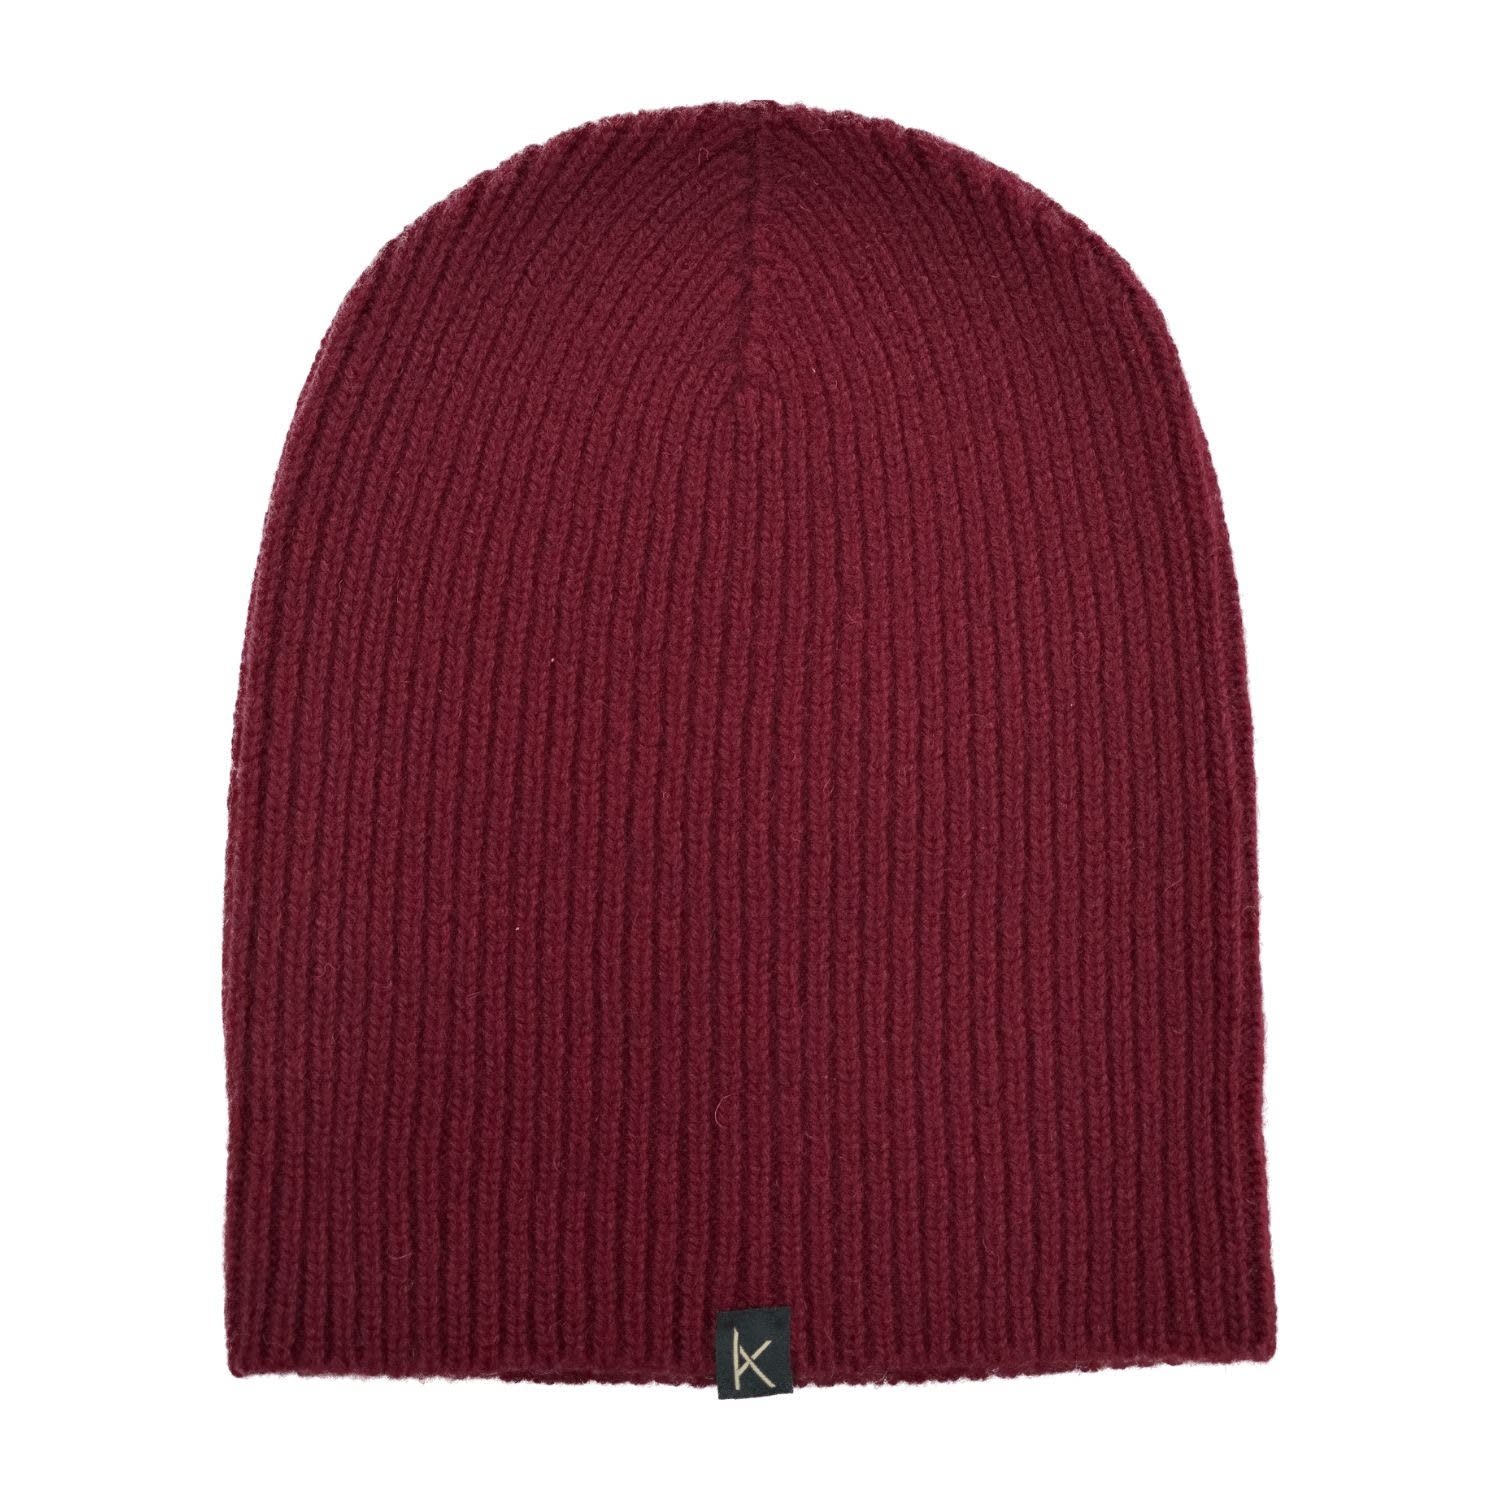 Men’s Red Claret Deluxe Knitted Cashmere Beanie Hat Kinalba